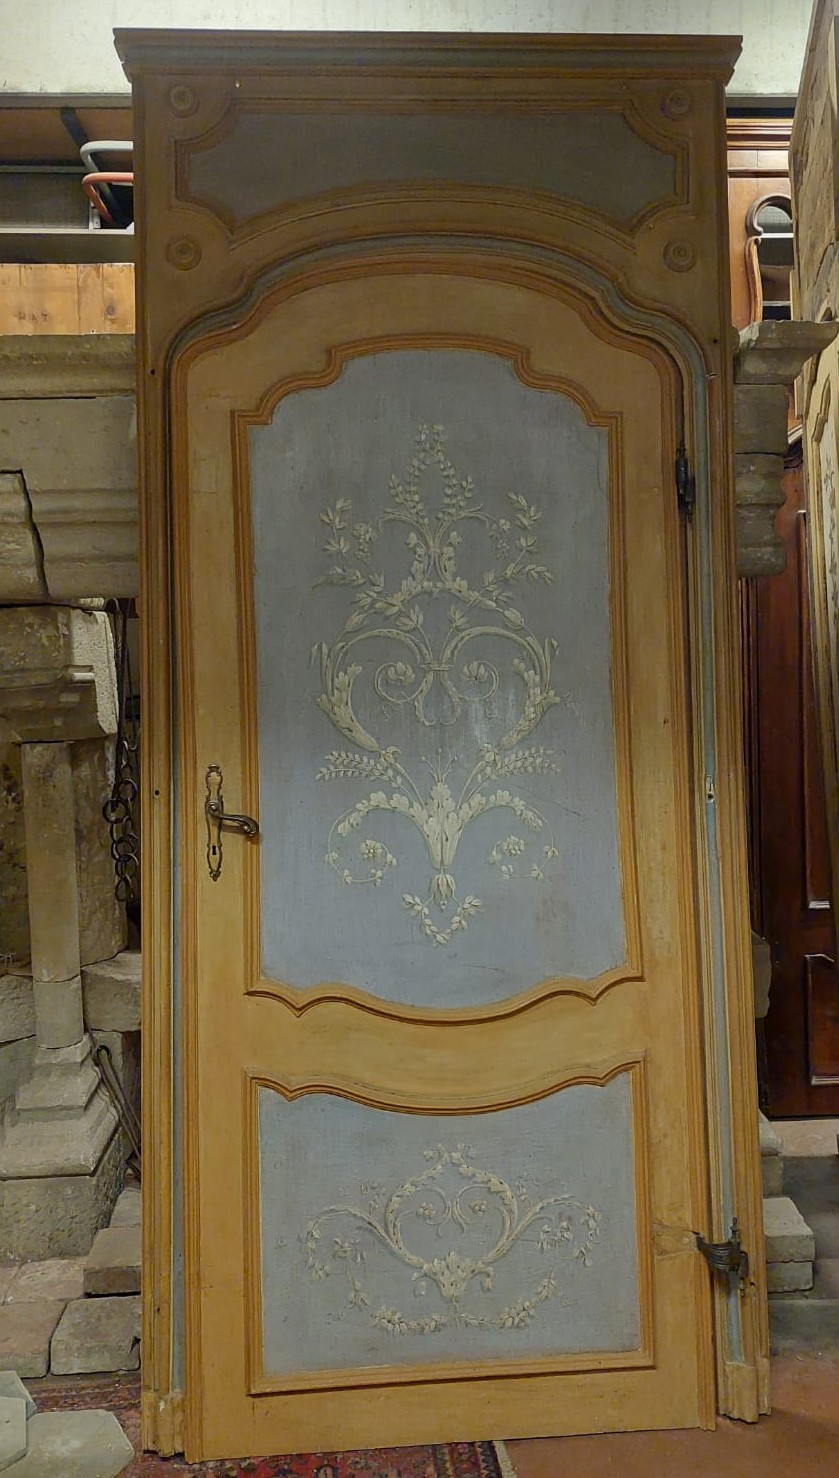 A ptl563 - single-leaf door complete with frame, meas. cm w 123 x h 278 